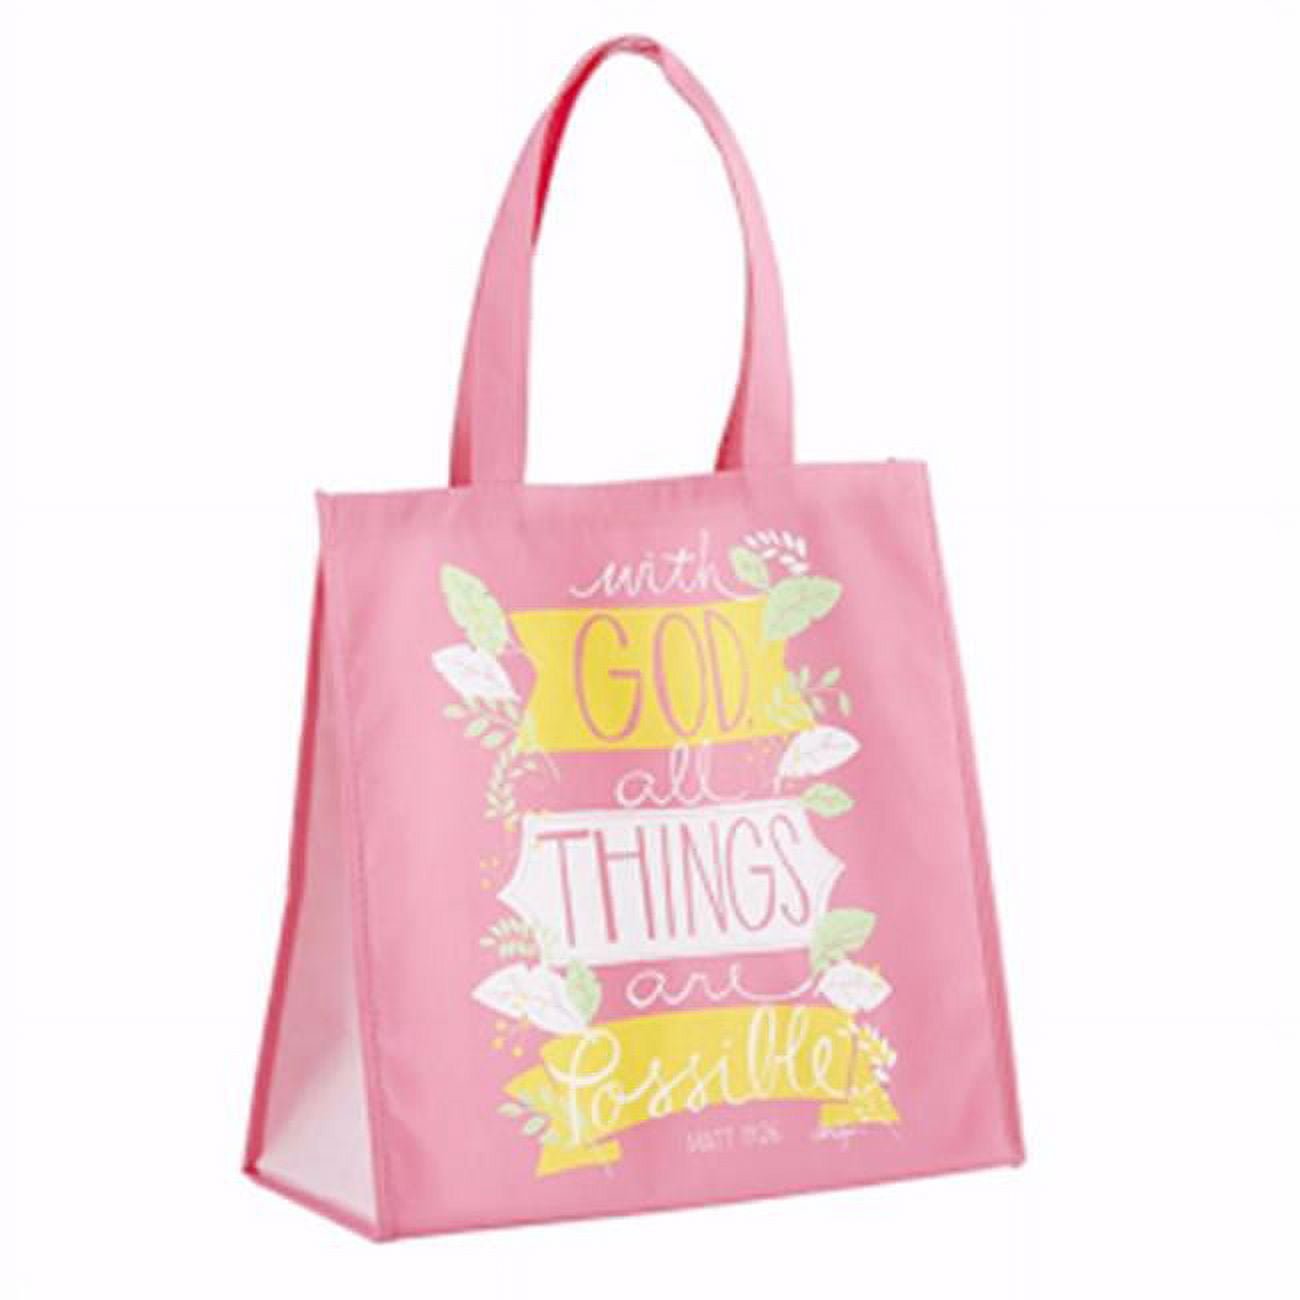 137161 13 In. With God All Things Are Possible Matthew 19-26 Nylon Tote Bag - Pink